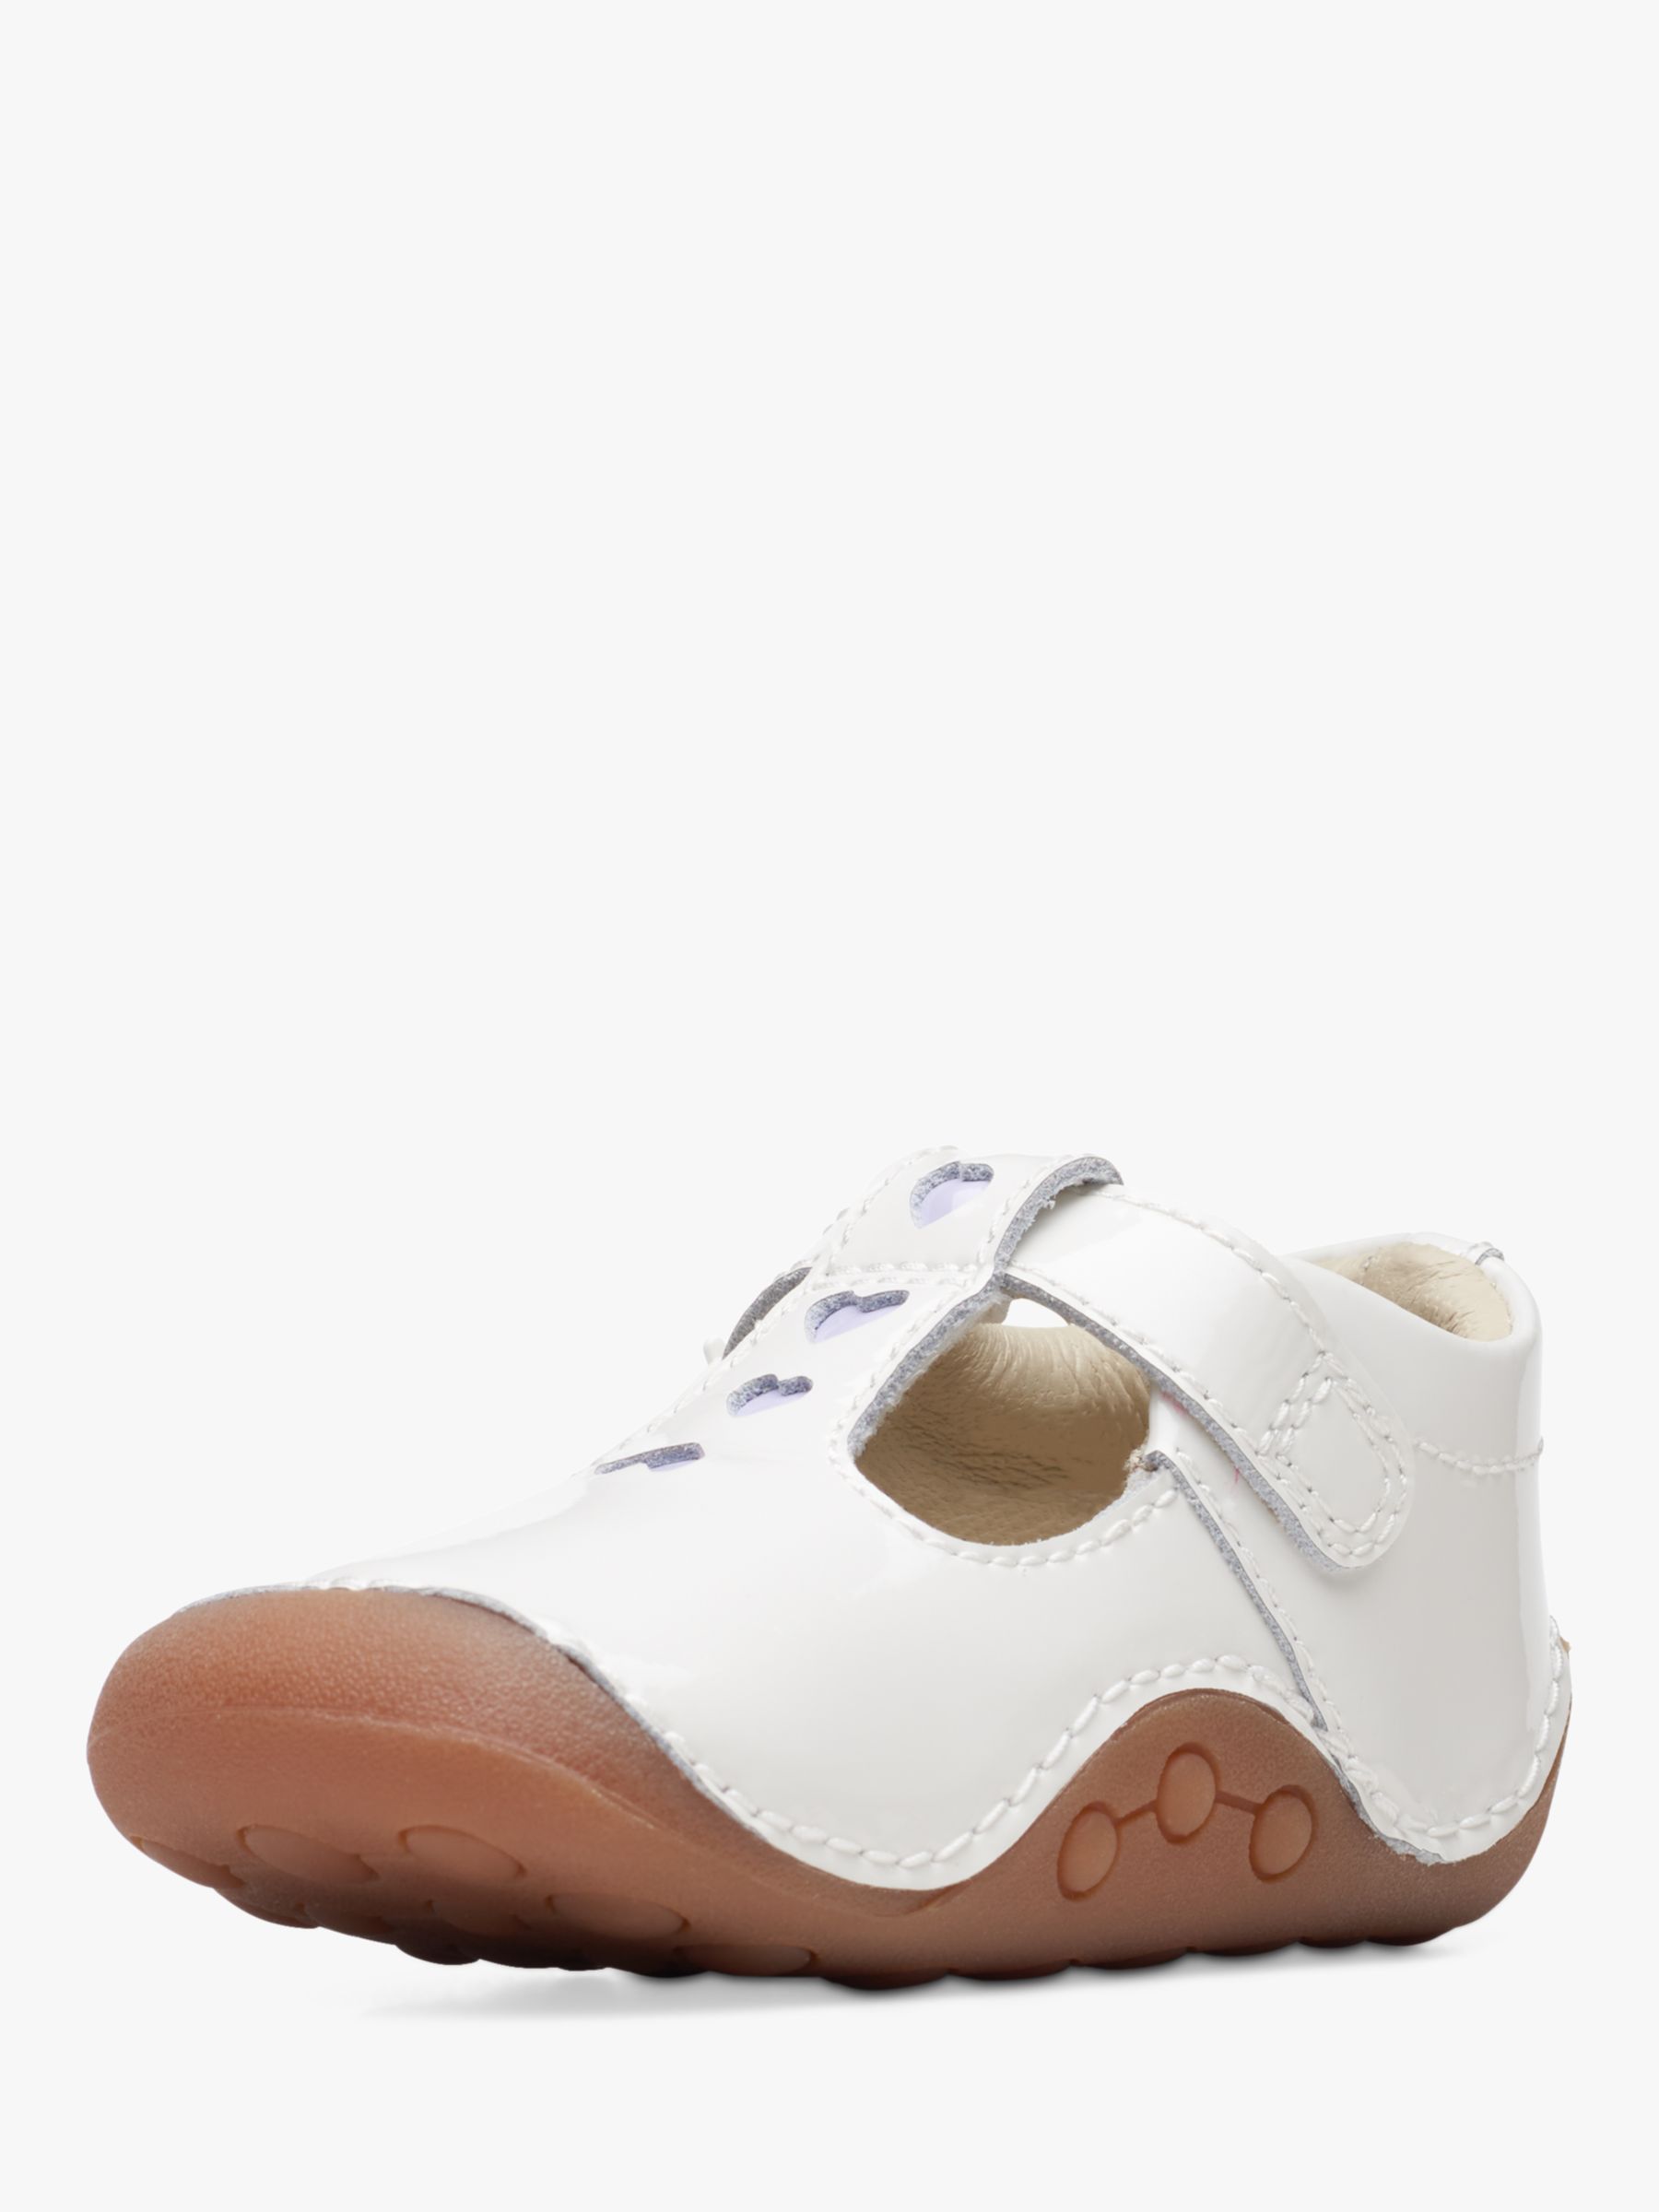 Clarks Baby Tiny Beat Patent Buckle Shoes, White, 2F Jnr